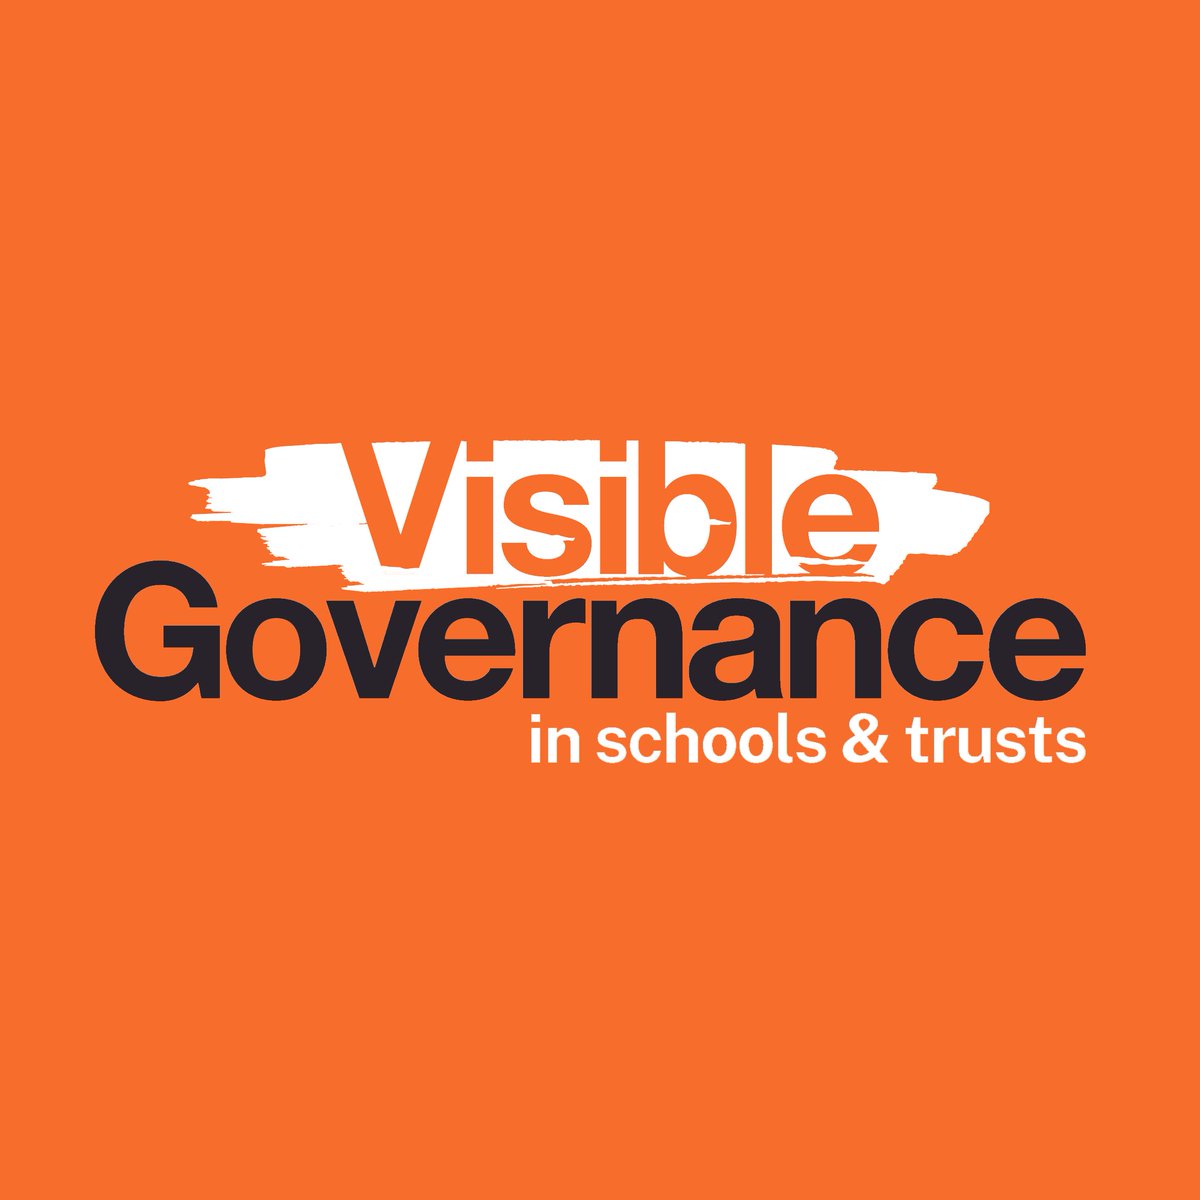 It's #schoolgovernor's day! First, we sincerely thank all of you who give your time and expertise to help your school or trust run the best way it can and for the benefit of your community and young people. You really do make all the difference. #Visiblegovernance